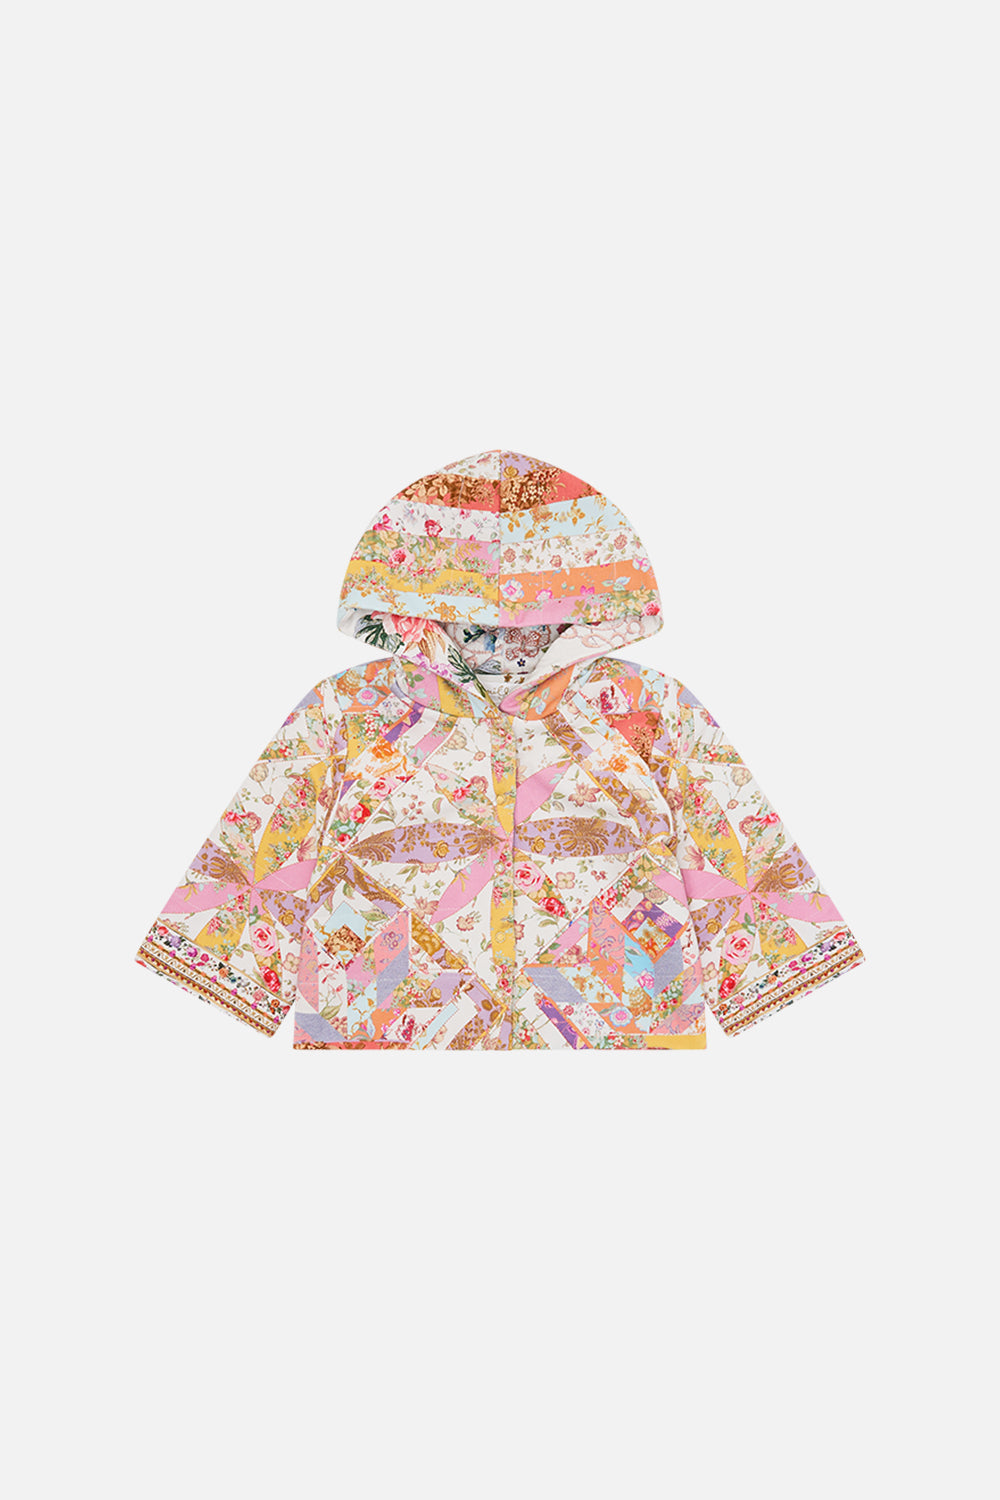 Milla by CAMILLA floral quilted puffer jacket in Sew Yesterday